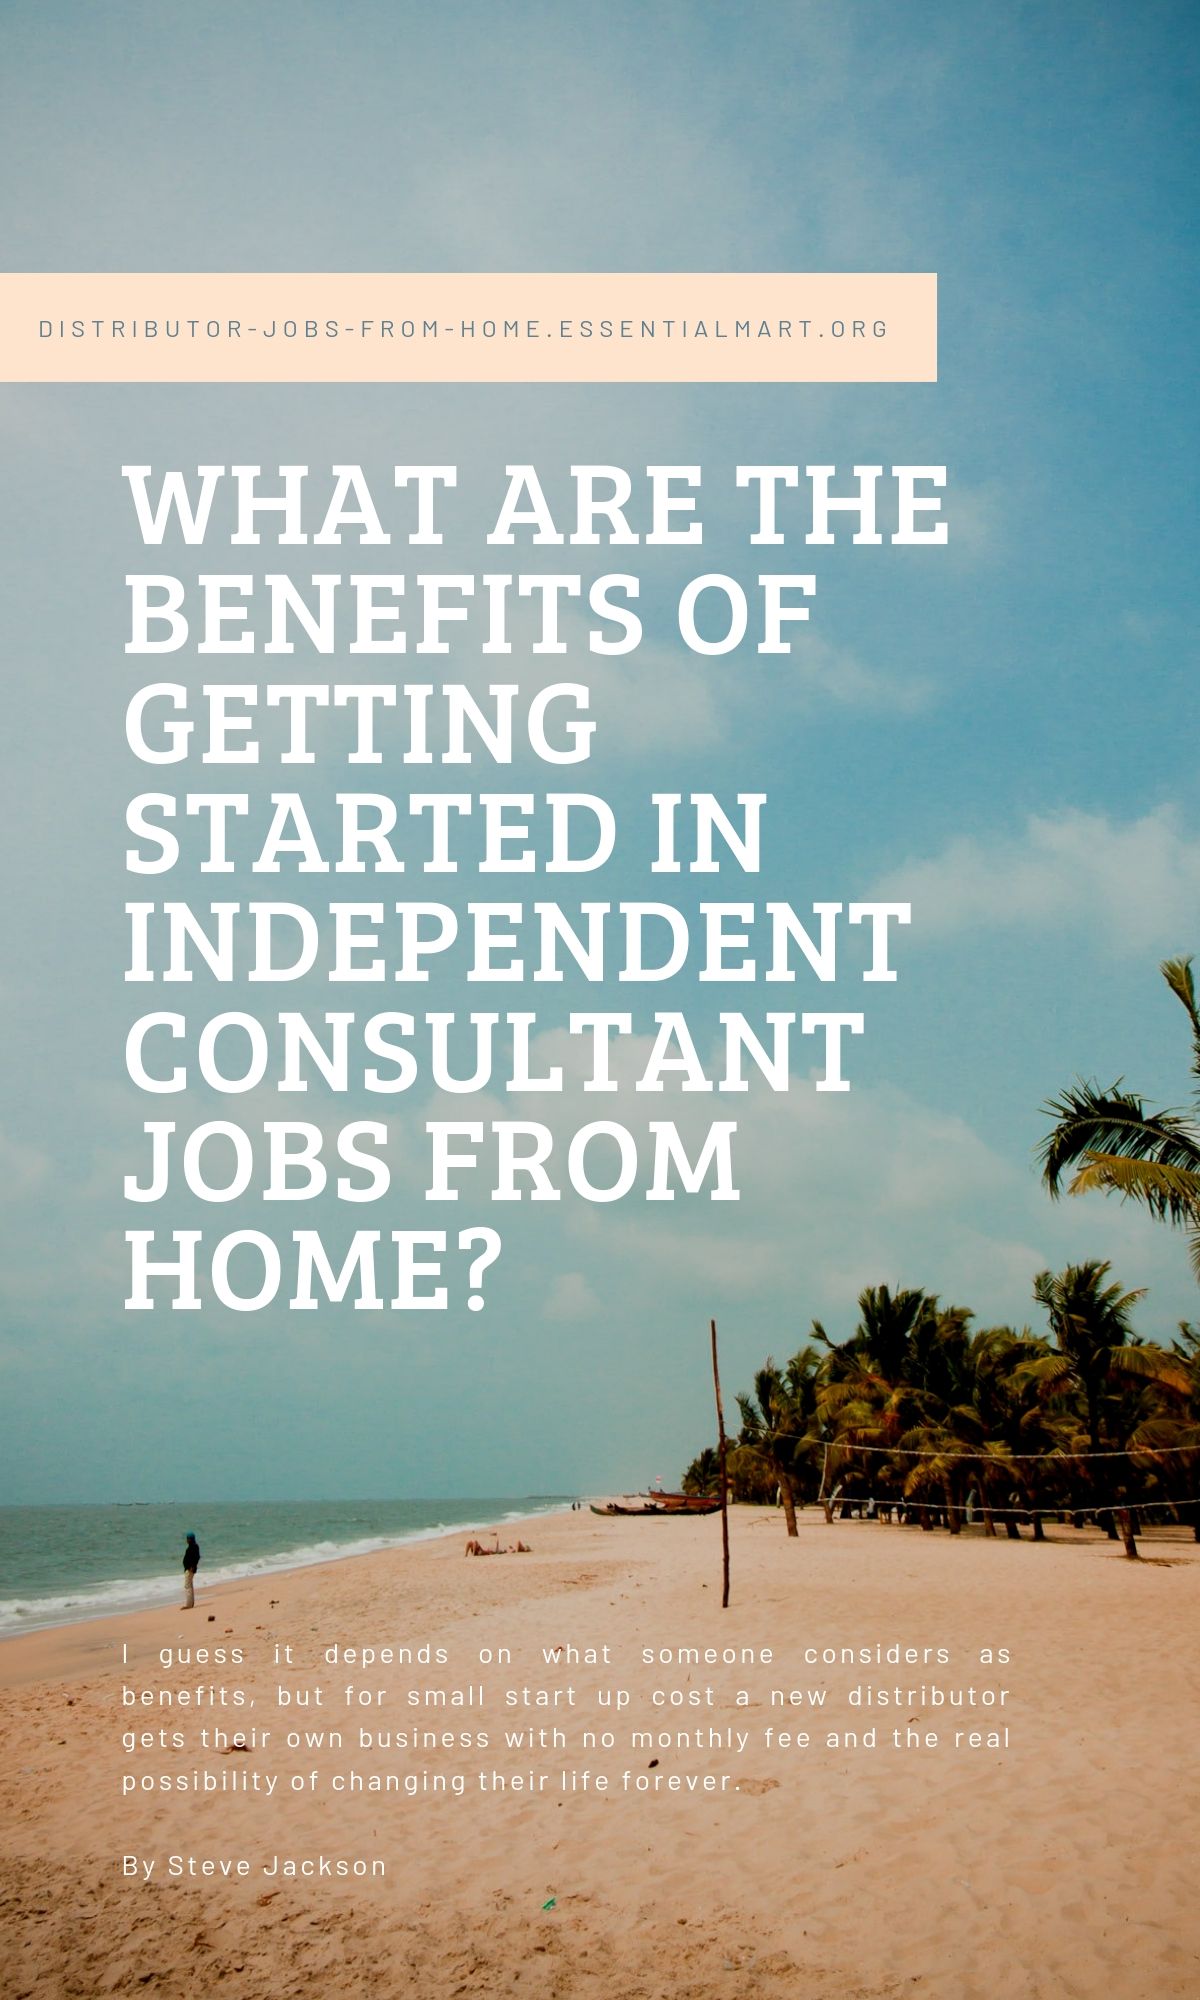 Independent consultant jobs from home